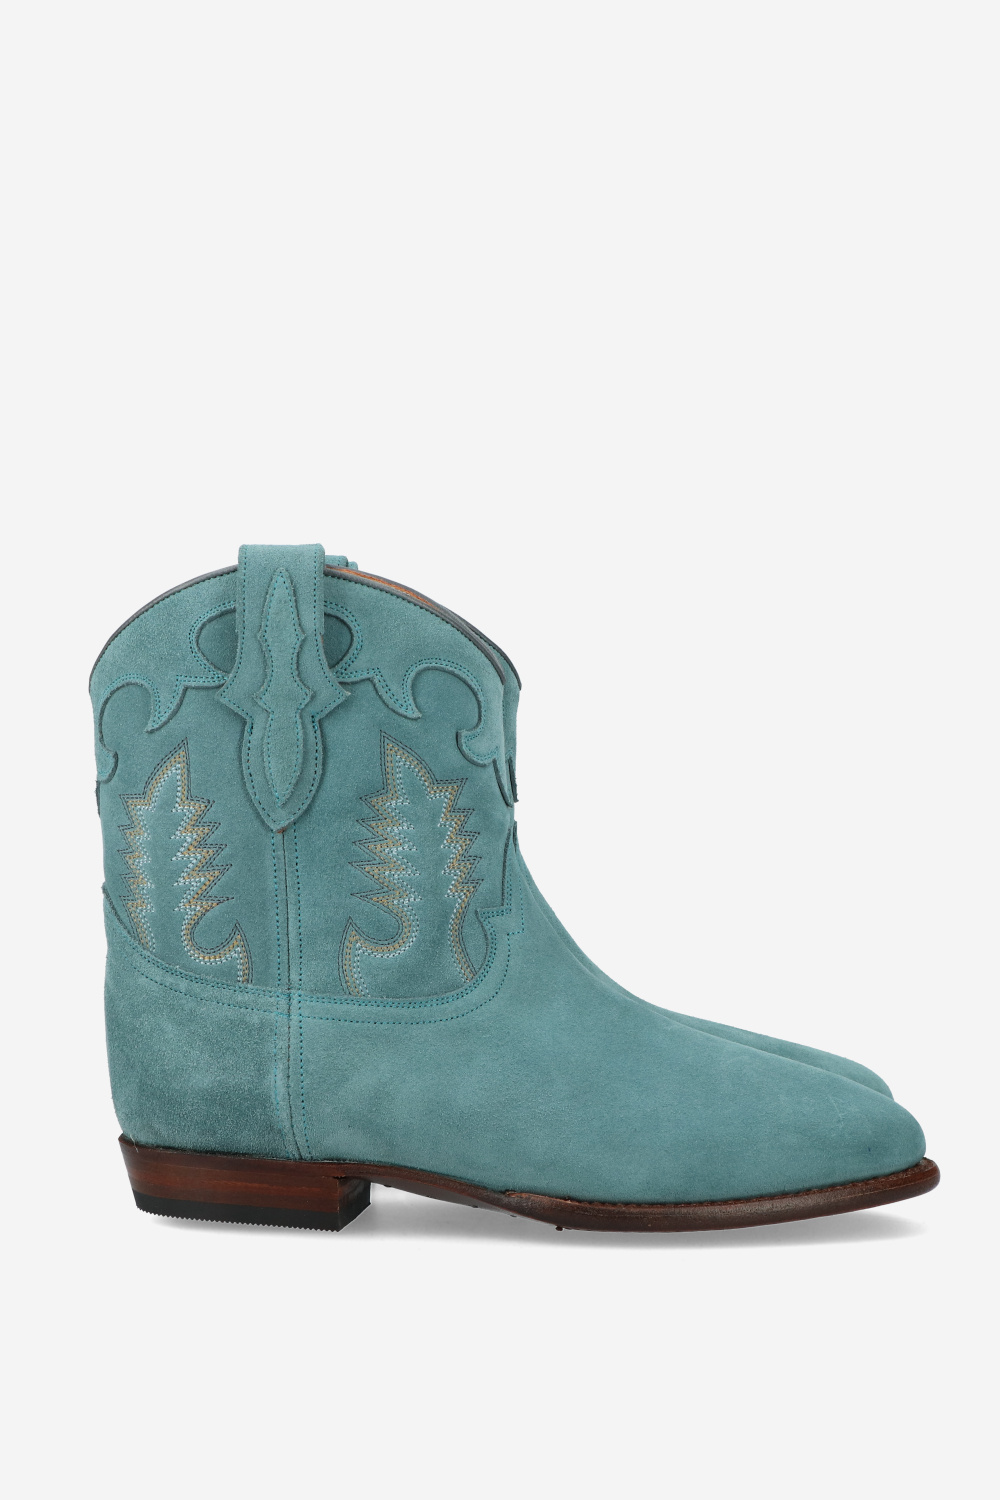 Shiloh Heritage Boots Blue